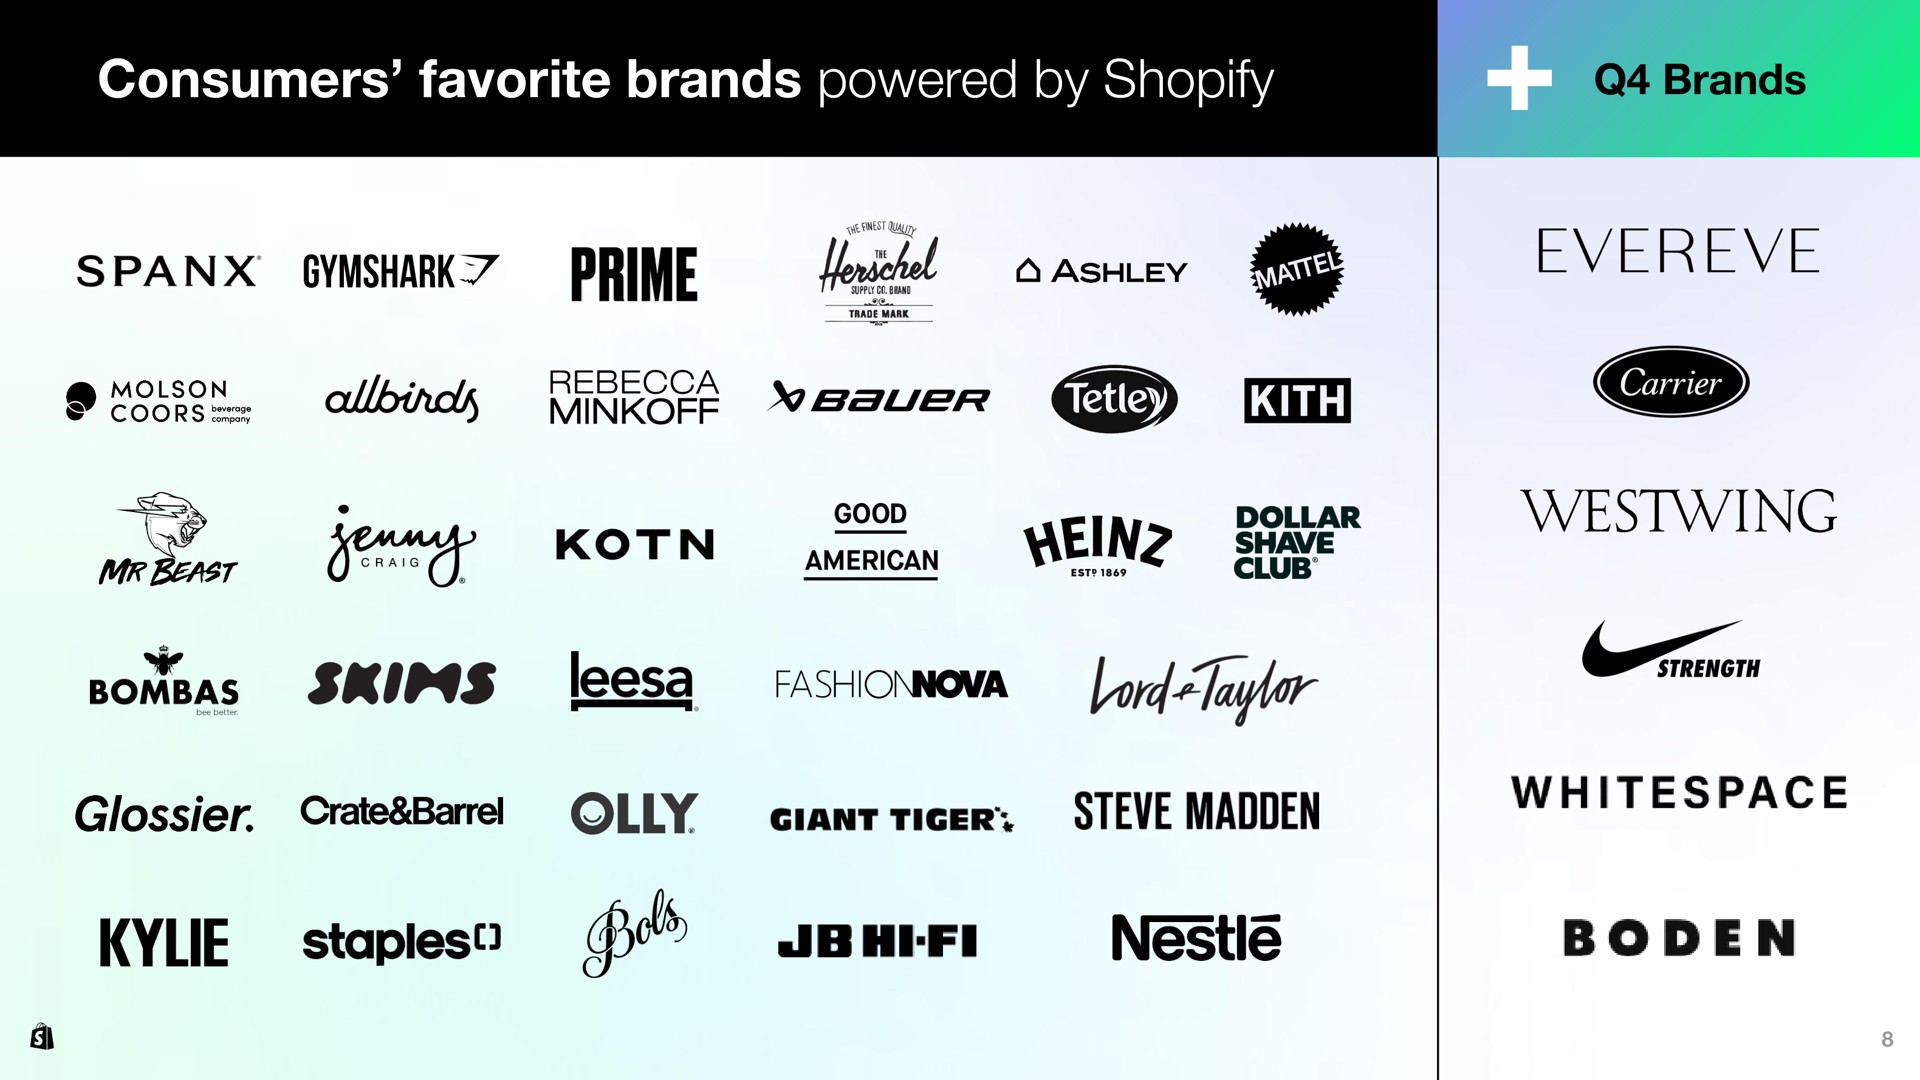 consumers favorite brands powered by prime seer shave lord crate barrel ticer madden nestle boden | Shopify